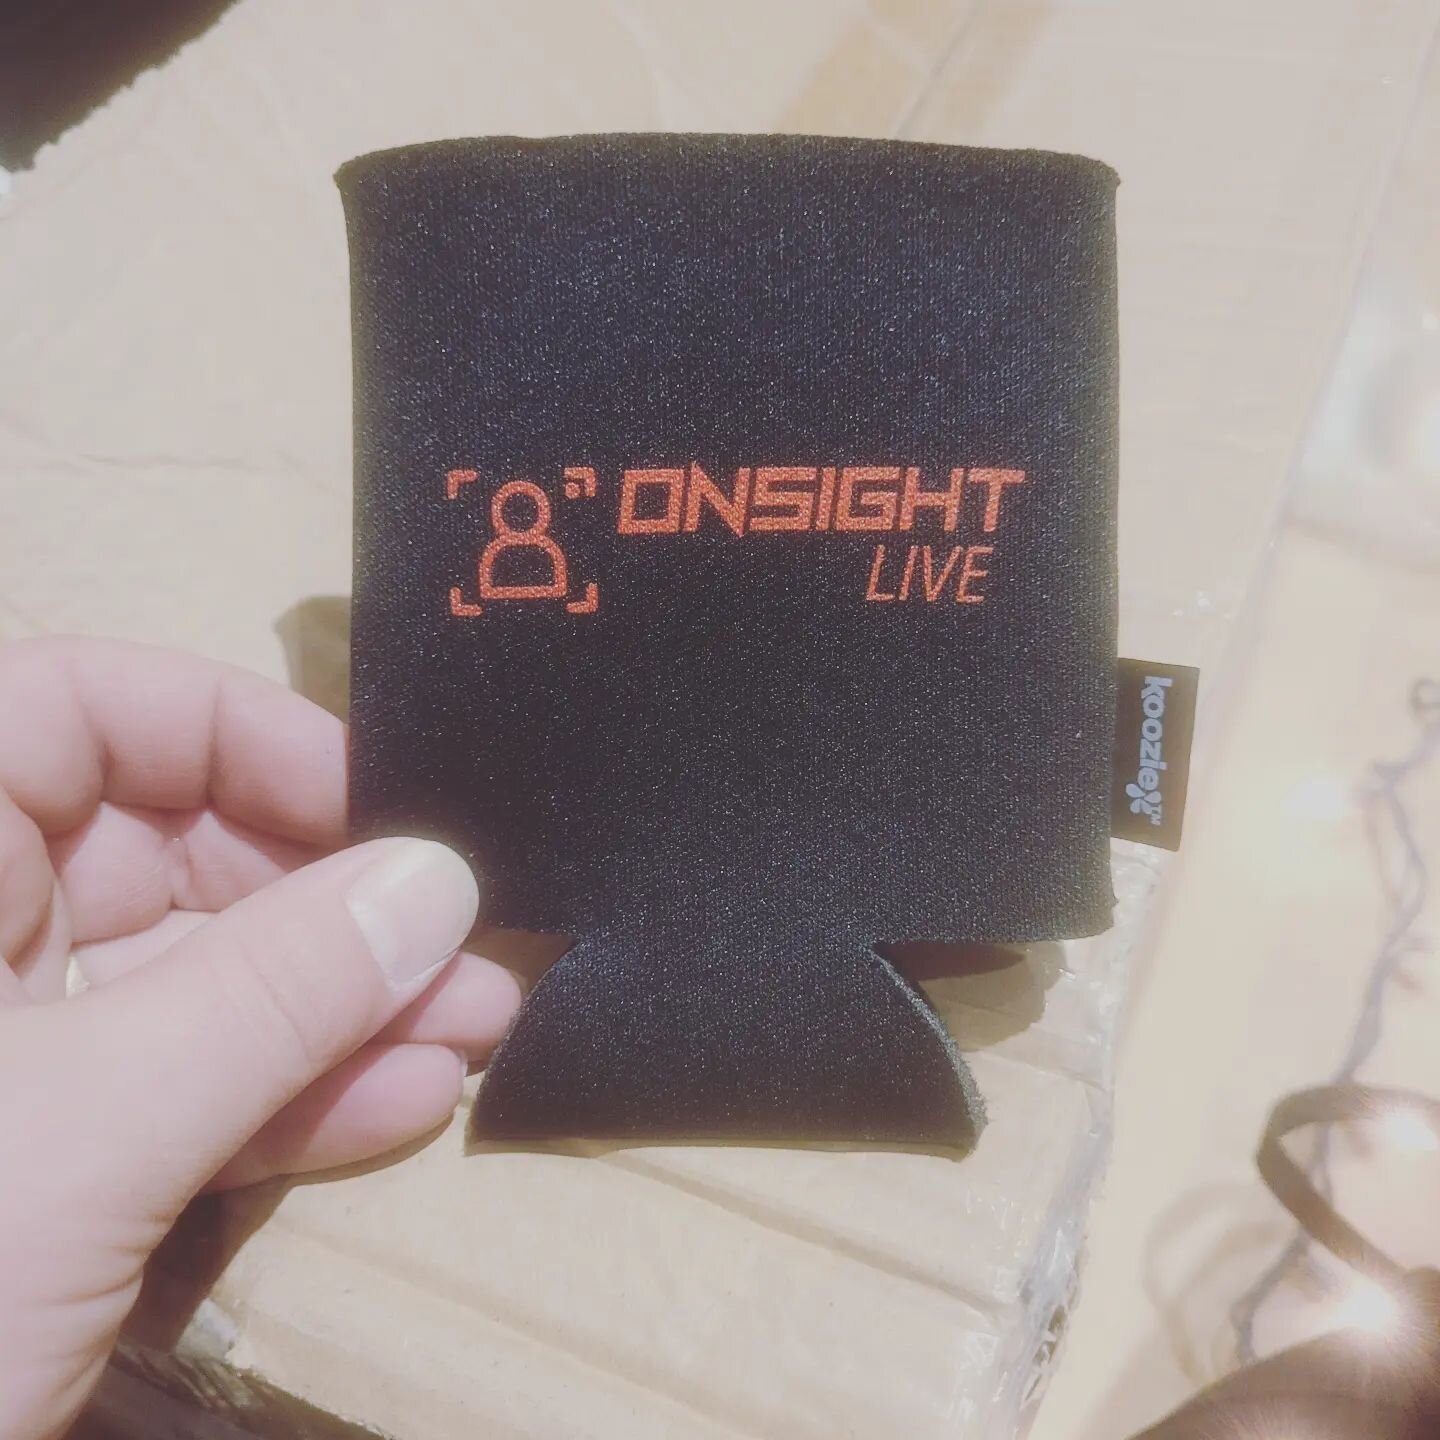 Onsight Live will keep guard, and keep your drink cool 😎 #koozie